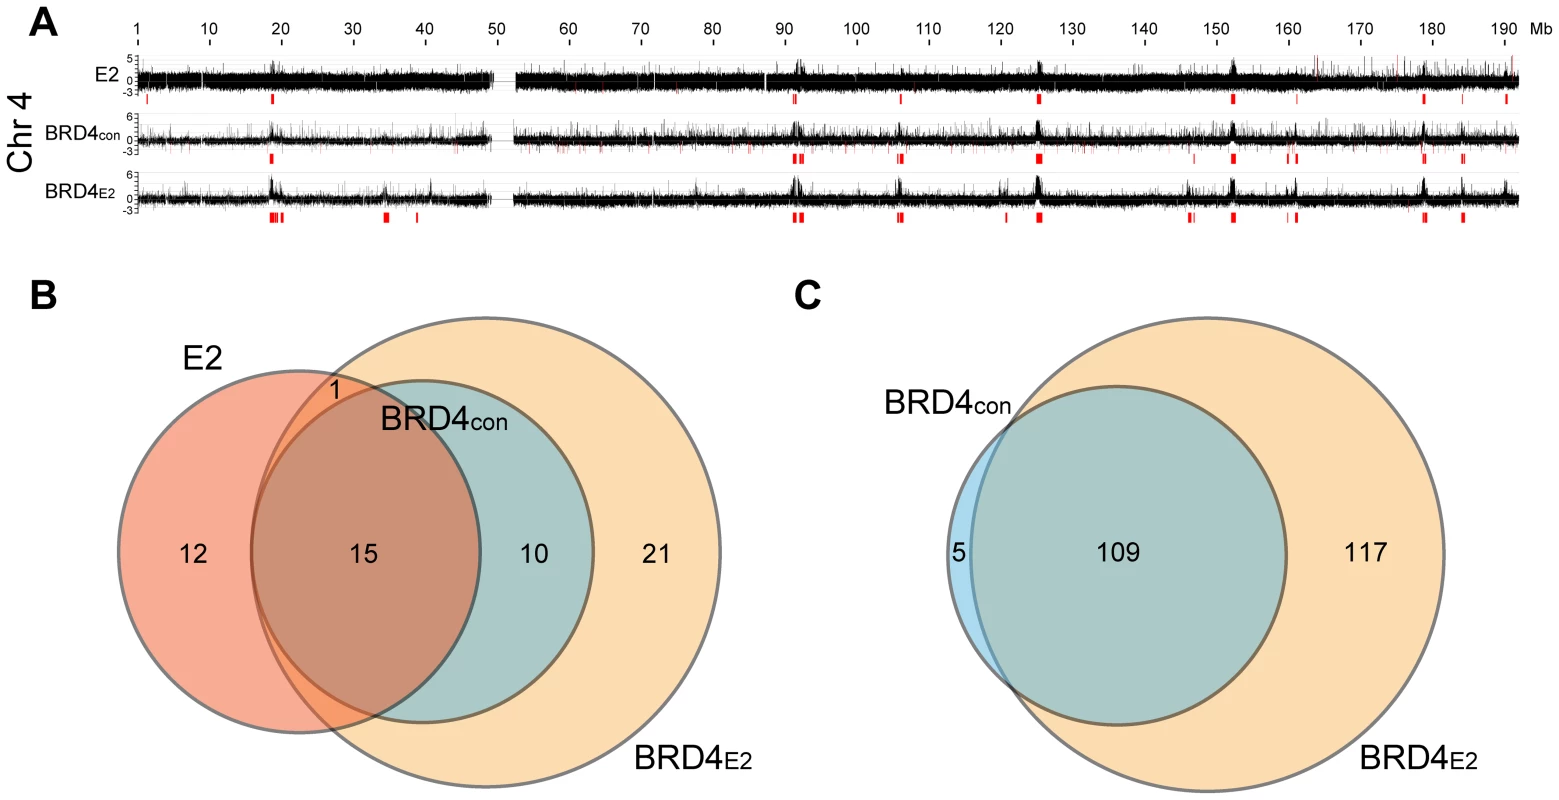 Profile of BRD4 binding to human chromosomes in C-33-1E2 cells.